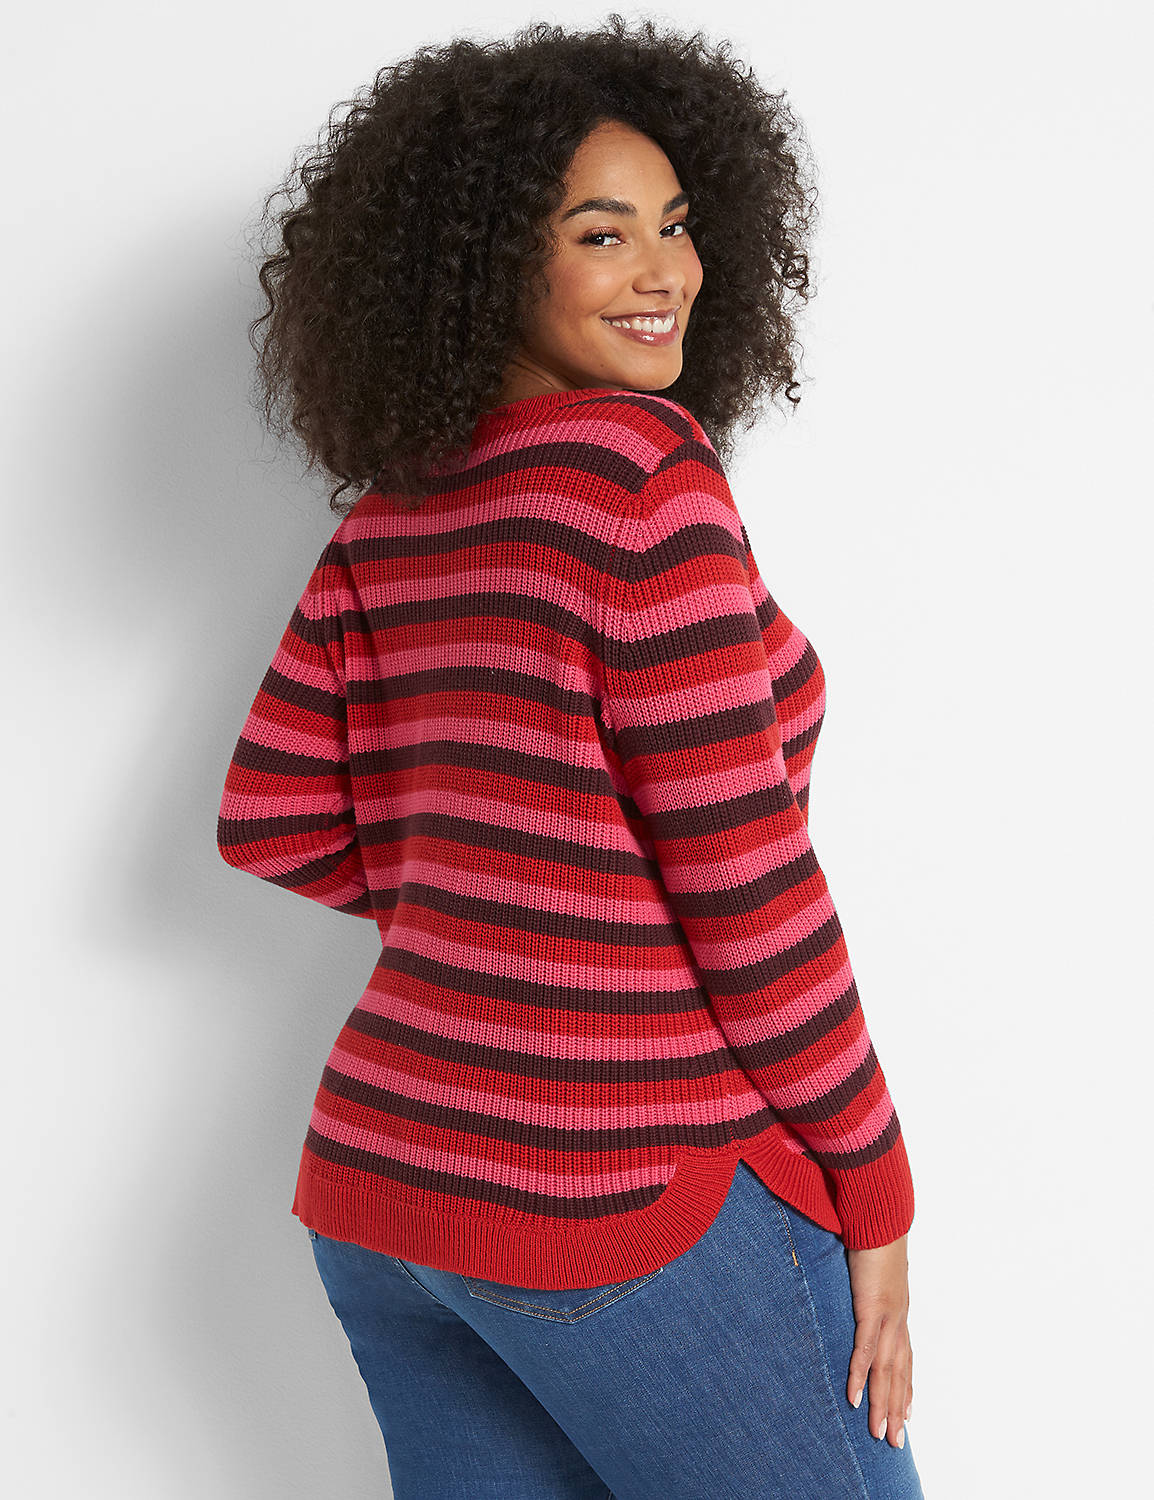 Long Sleeve Open Crew Neck Curved Hem Pullover 1121039:PANTONE Haute Red:10/12 Product Image 2